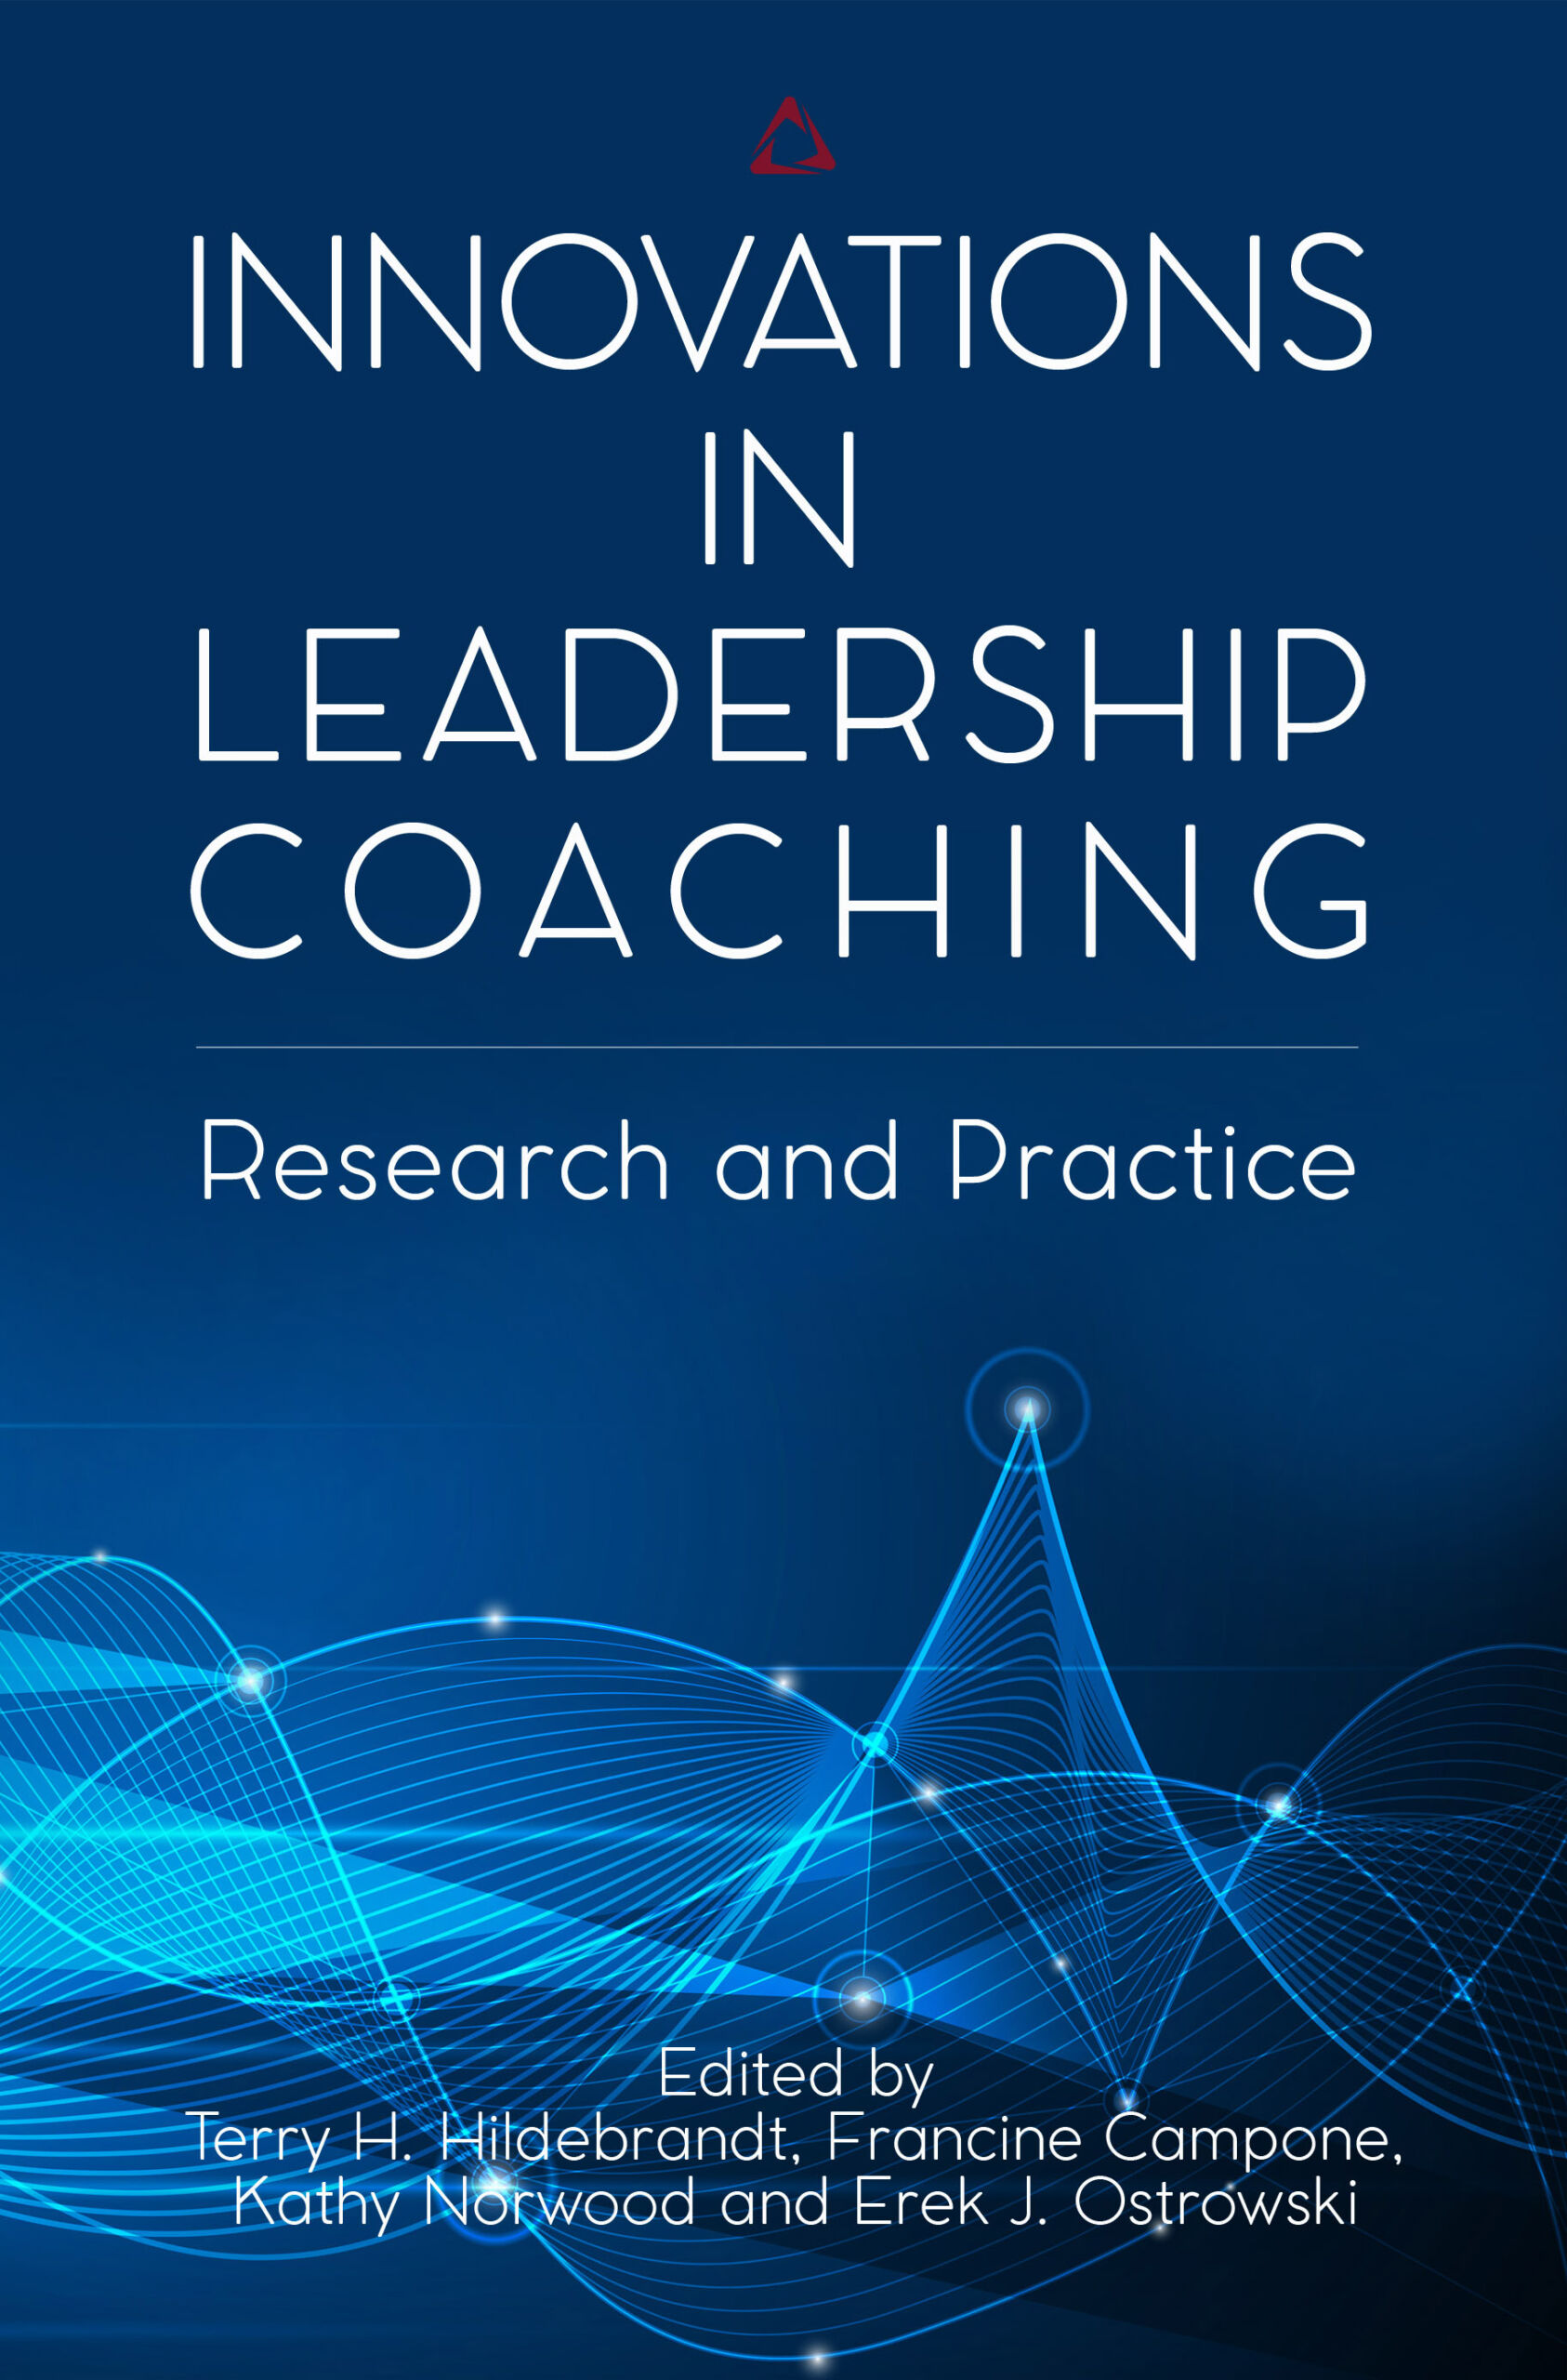 nnovations in Leadership Coaching: Research and Practice (Fielding Monograph Series)